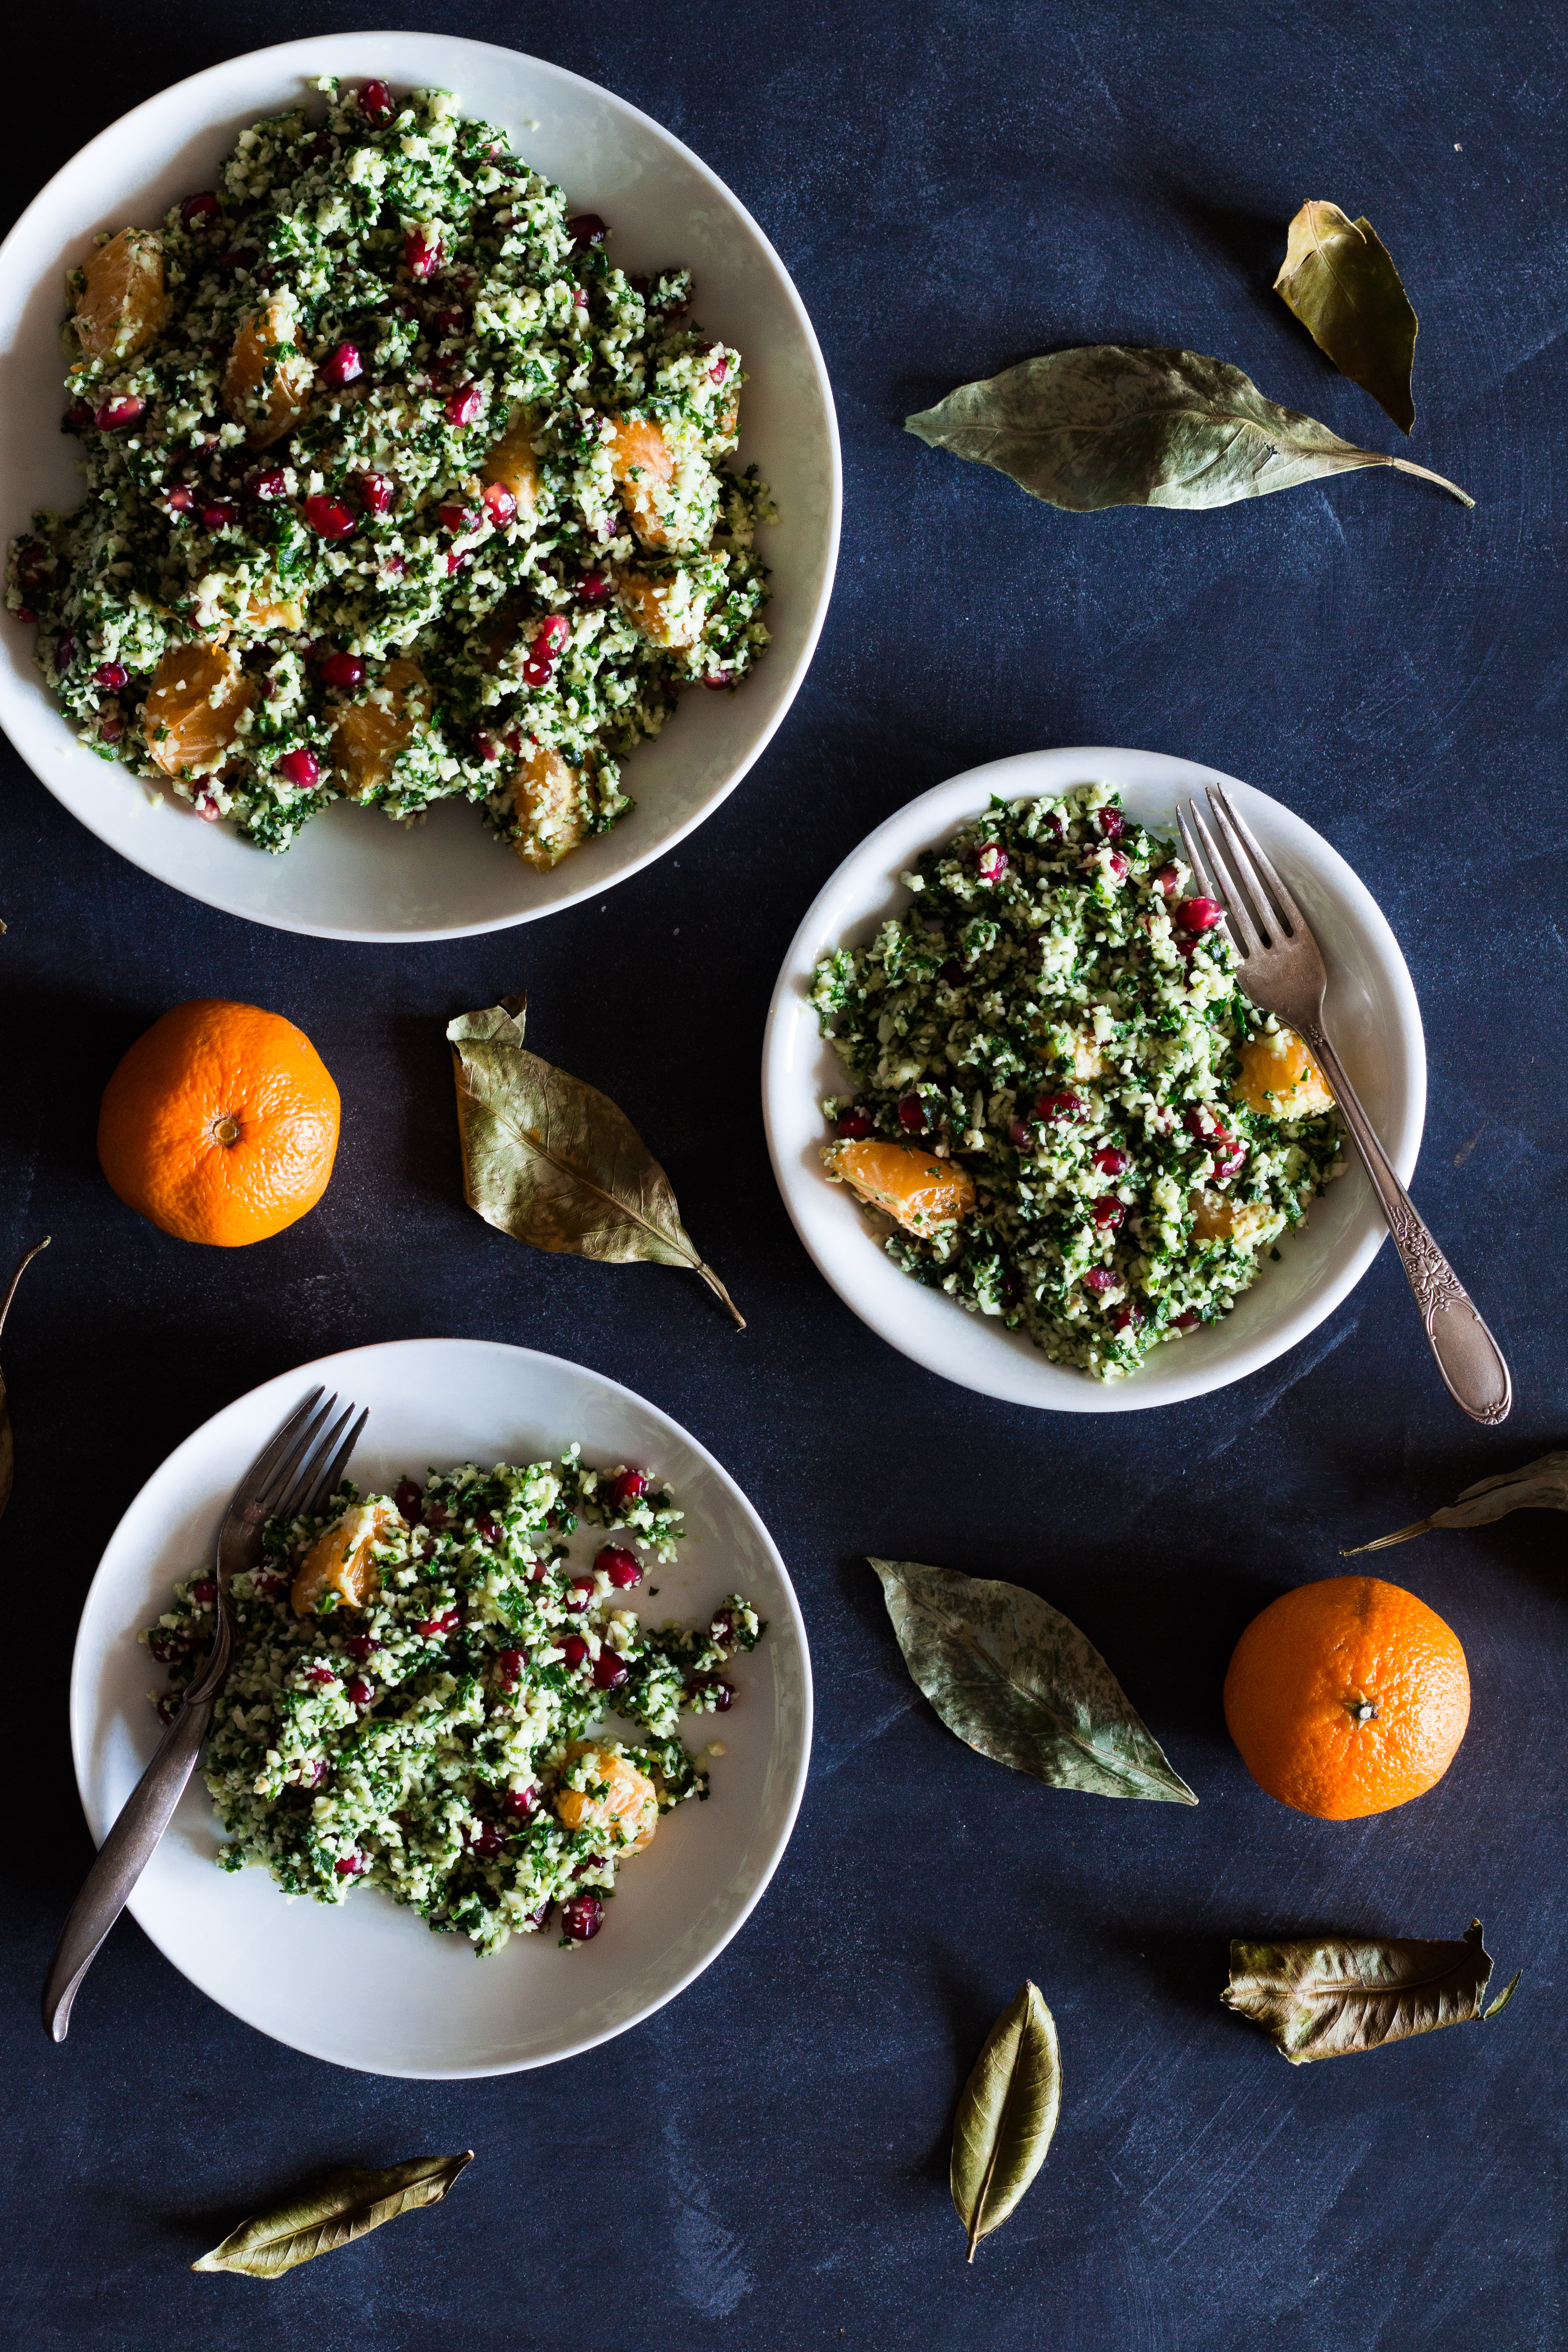 Overhead shot of three circular plates with servings of cauliflower and kale tabbouleh on a dark blue surface and surrounded by tangerines and green leaves.